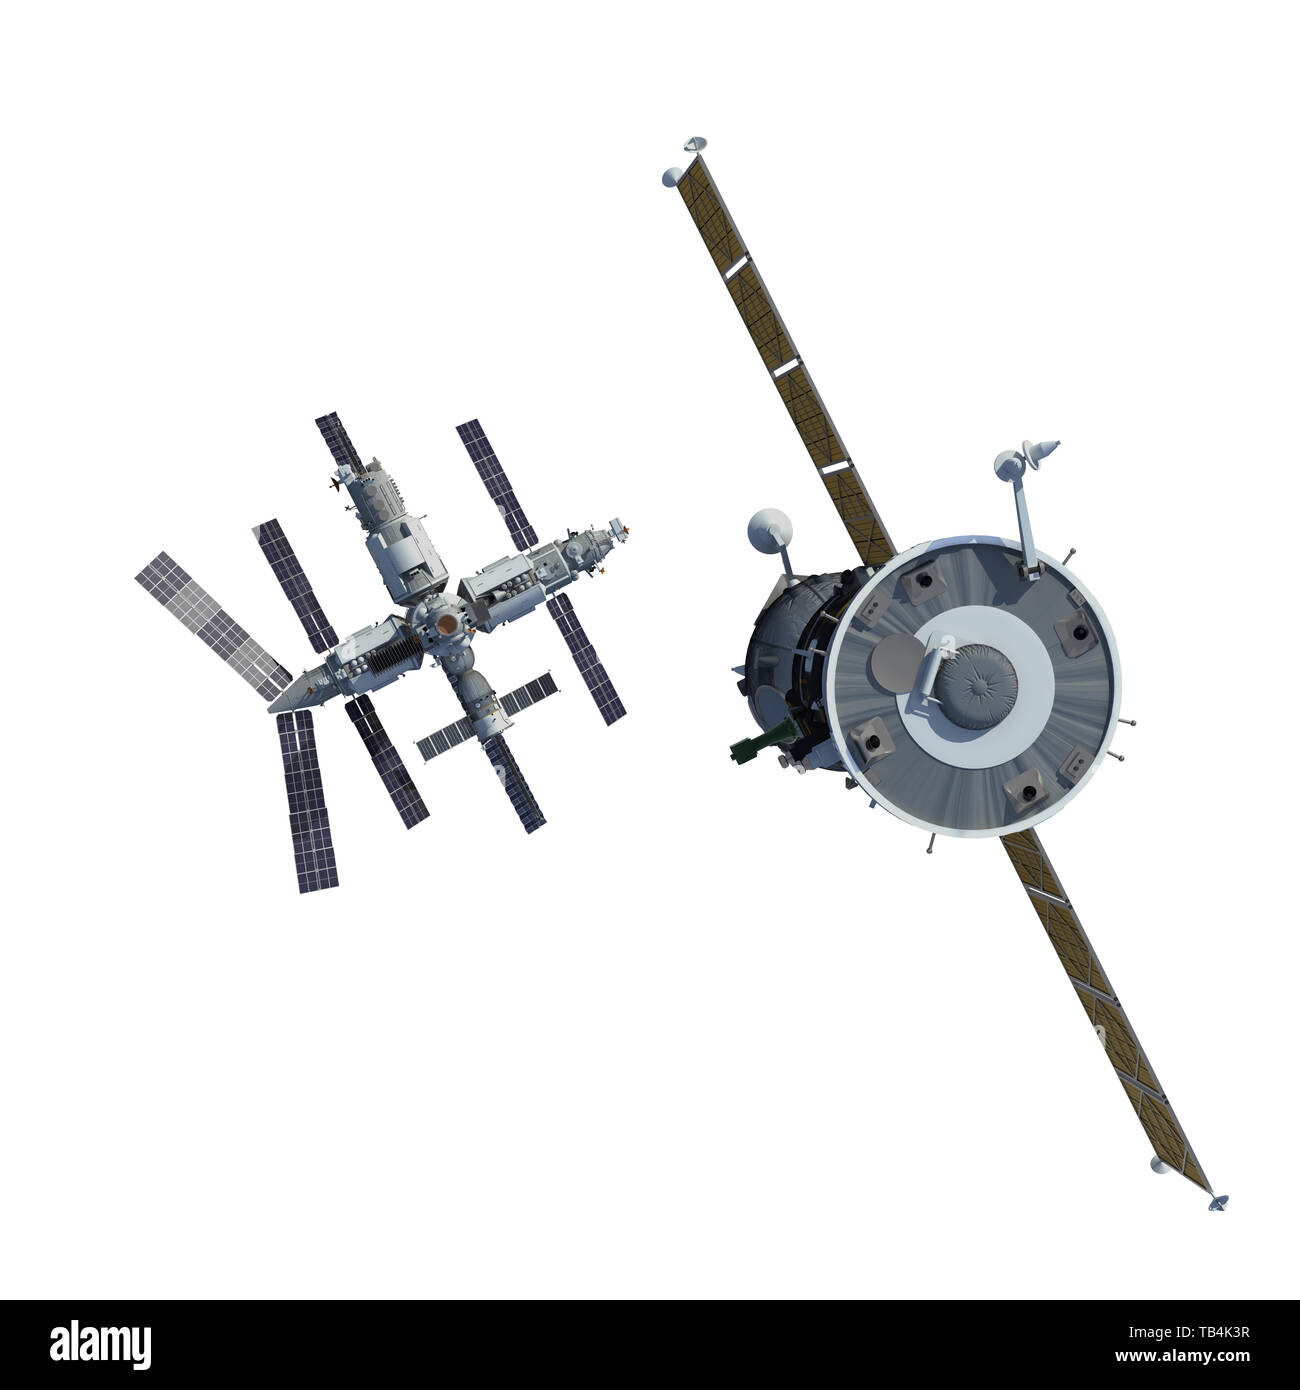 The Spacecraft Flies To Space Station Isolated On White Background. 3D Illustration. Stock Photo